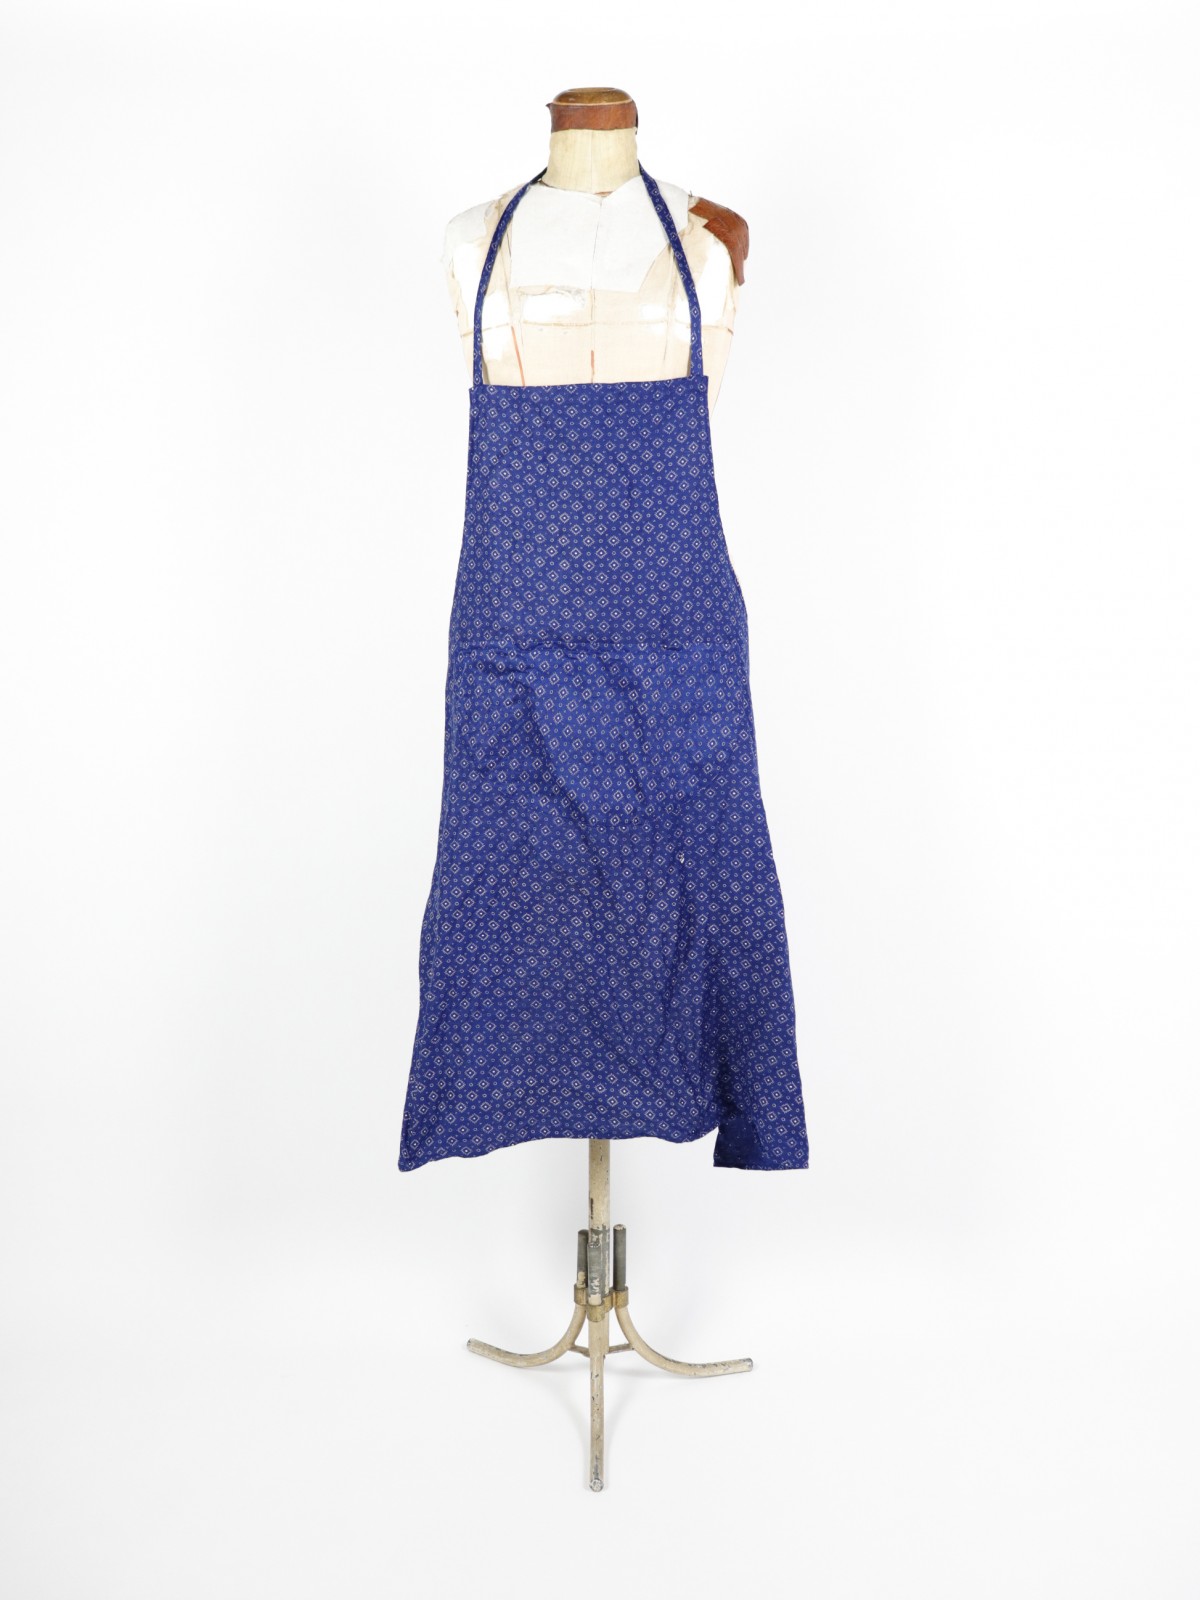 french fabric, brown.remake,apron,jacquard